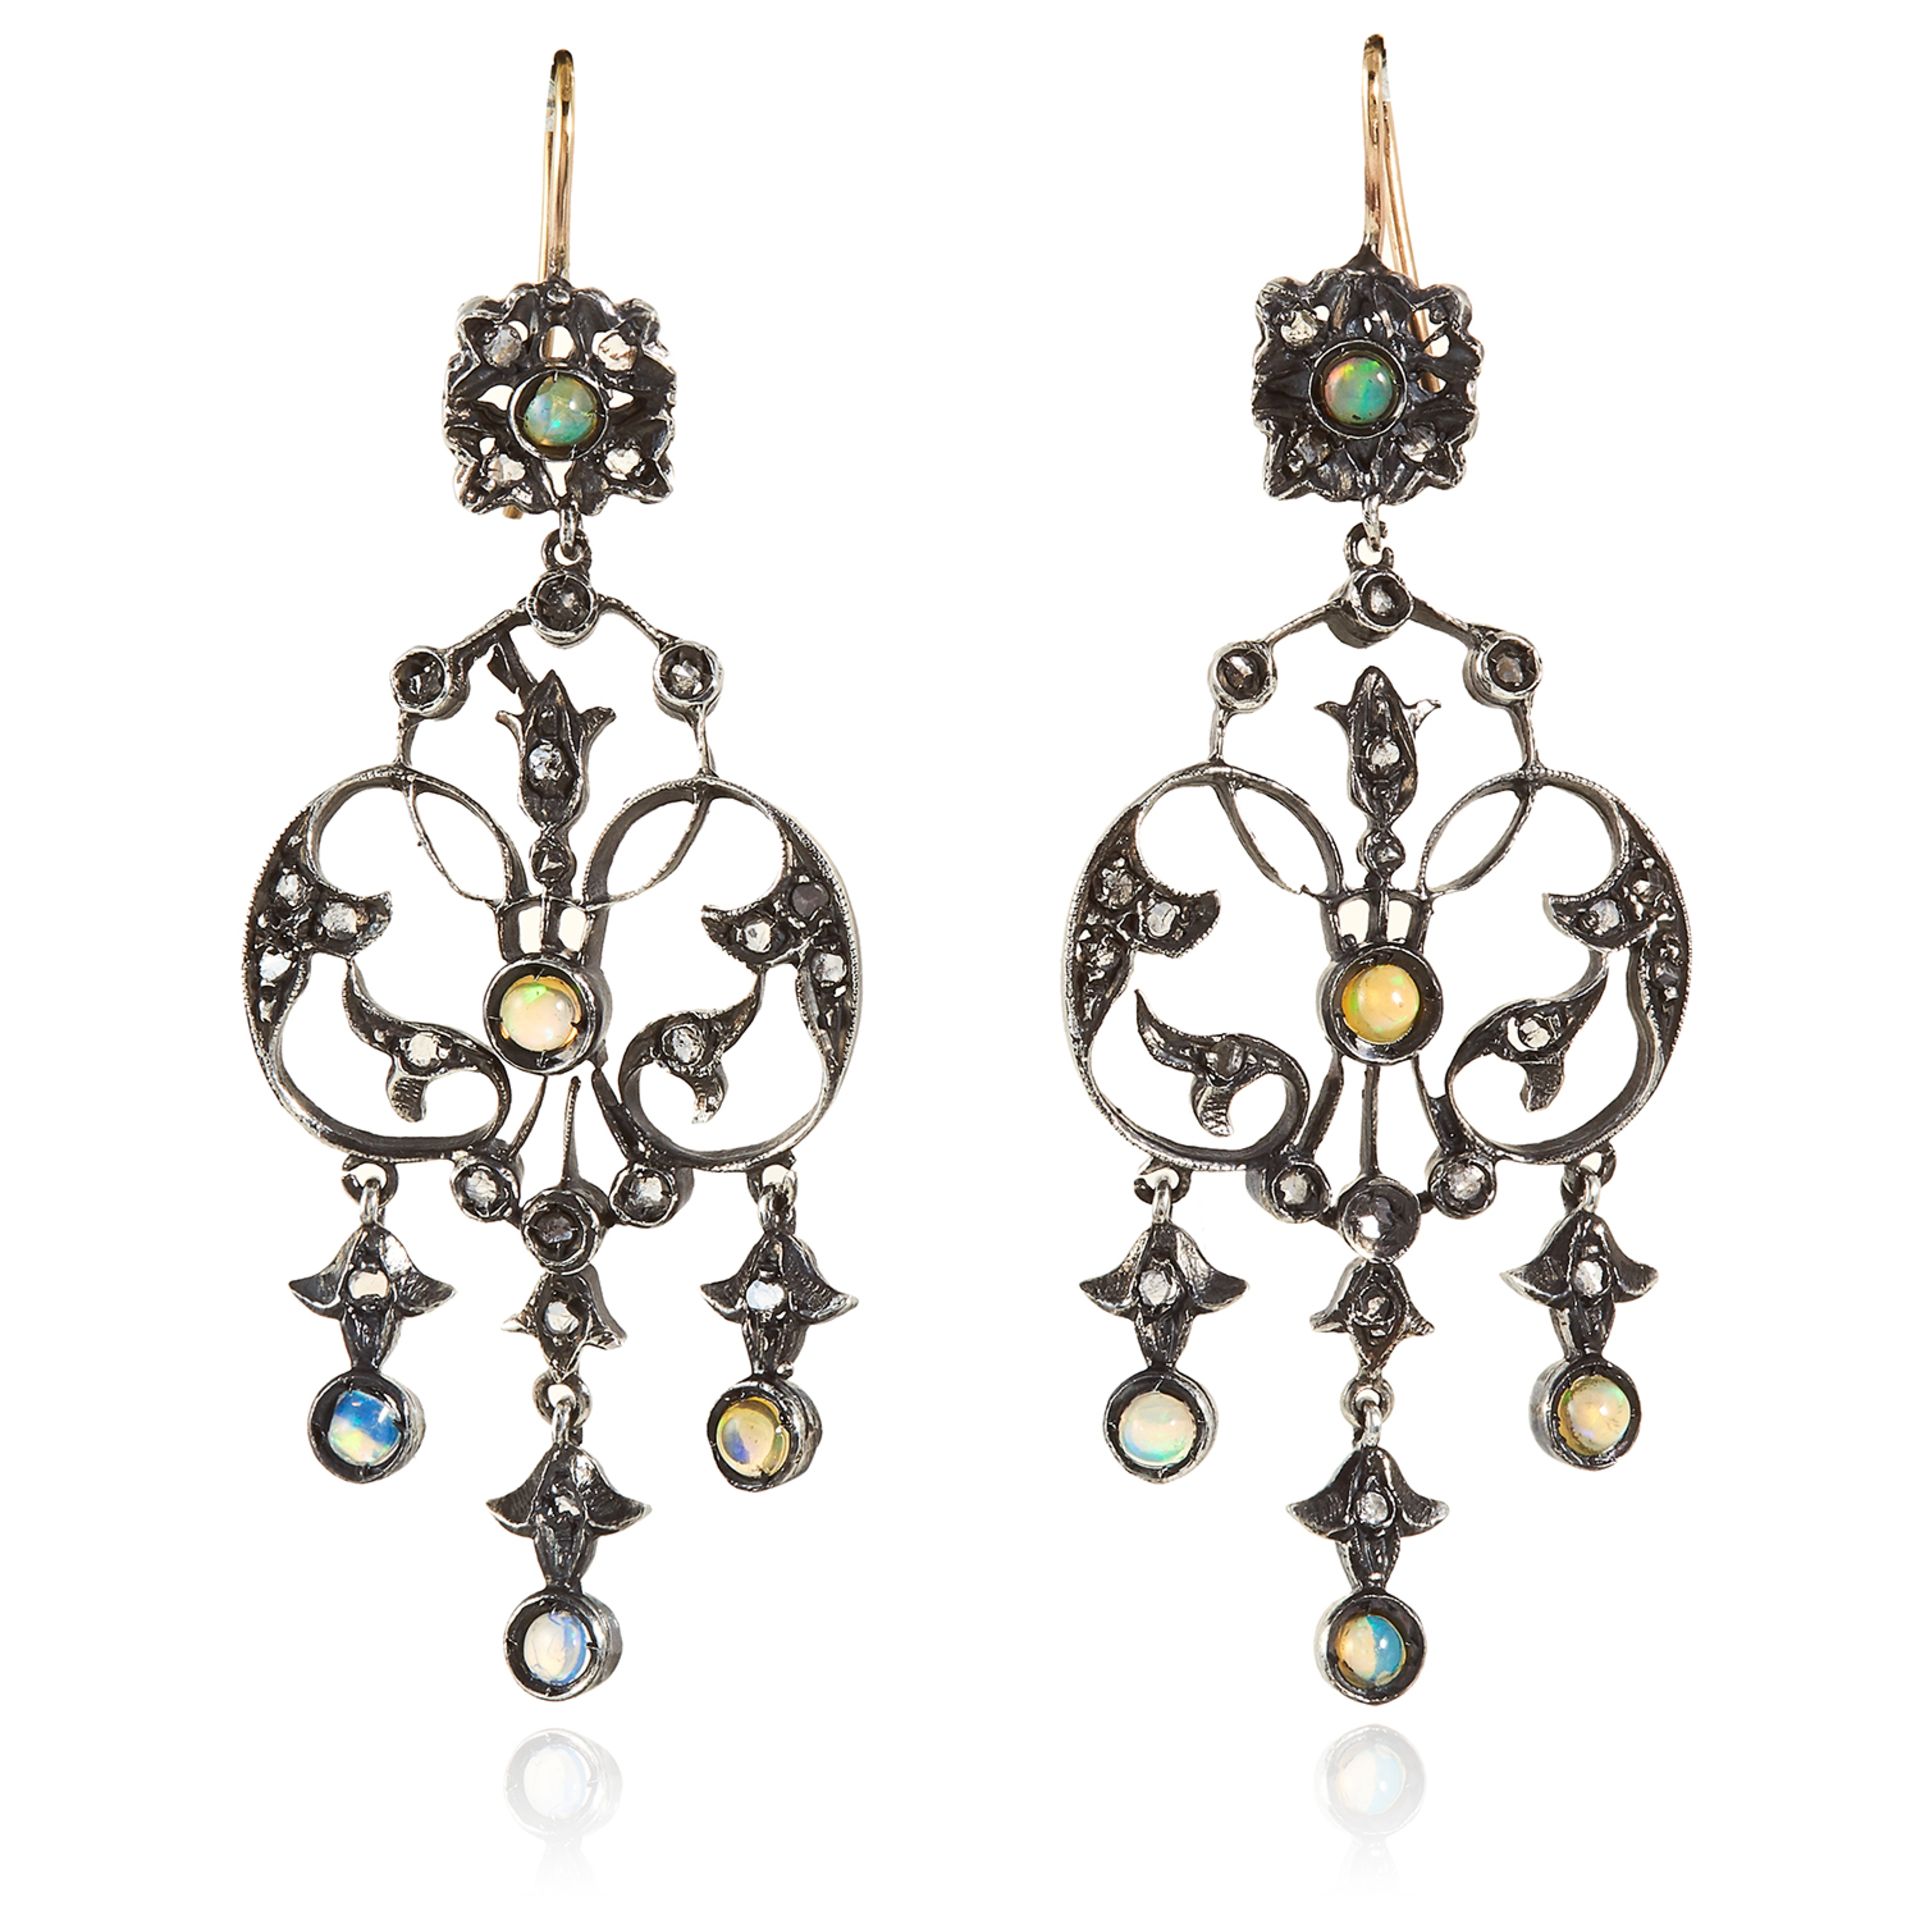 A PAIR OF OPAL AND DIAMOND EARRINGS in gold and silver, the openwork scrolling design set with opals